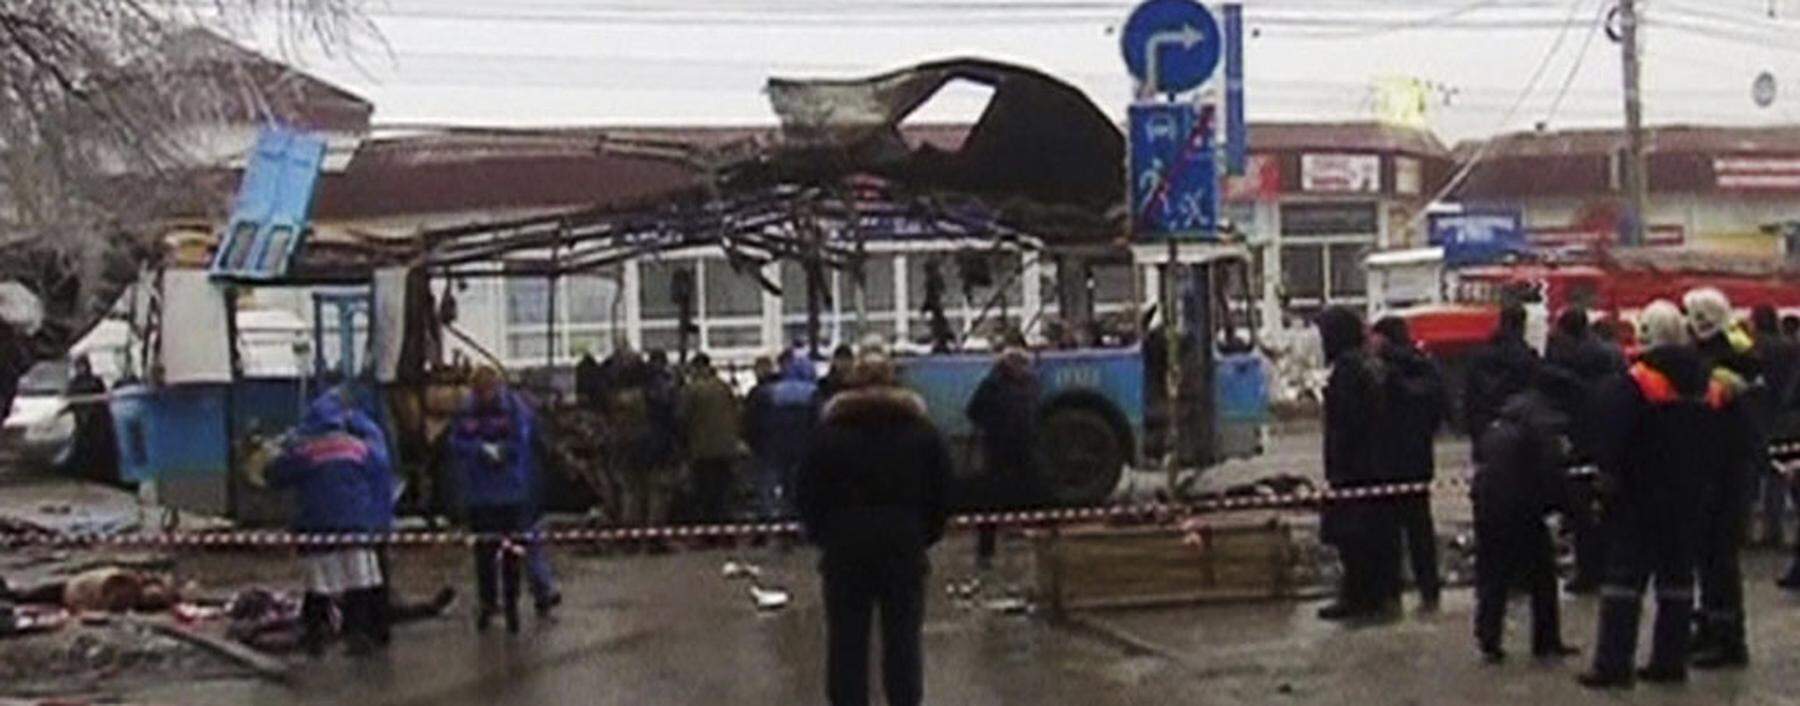 A still image taken from video shows members of the emergency services working at the site of a blast on a trolleybus in Volgograd